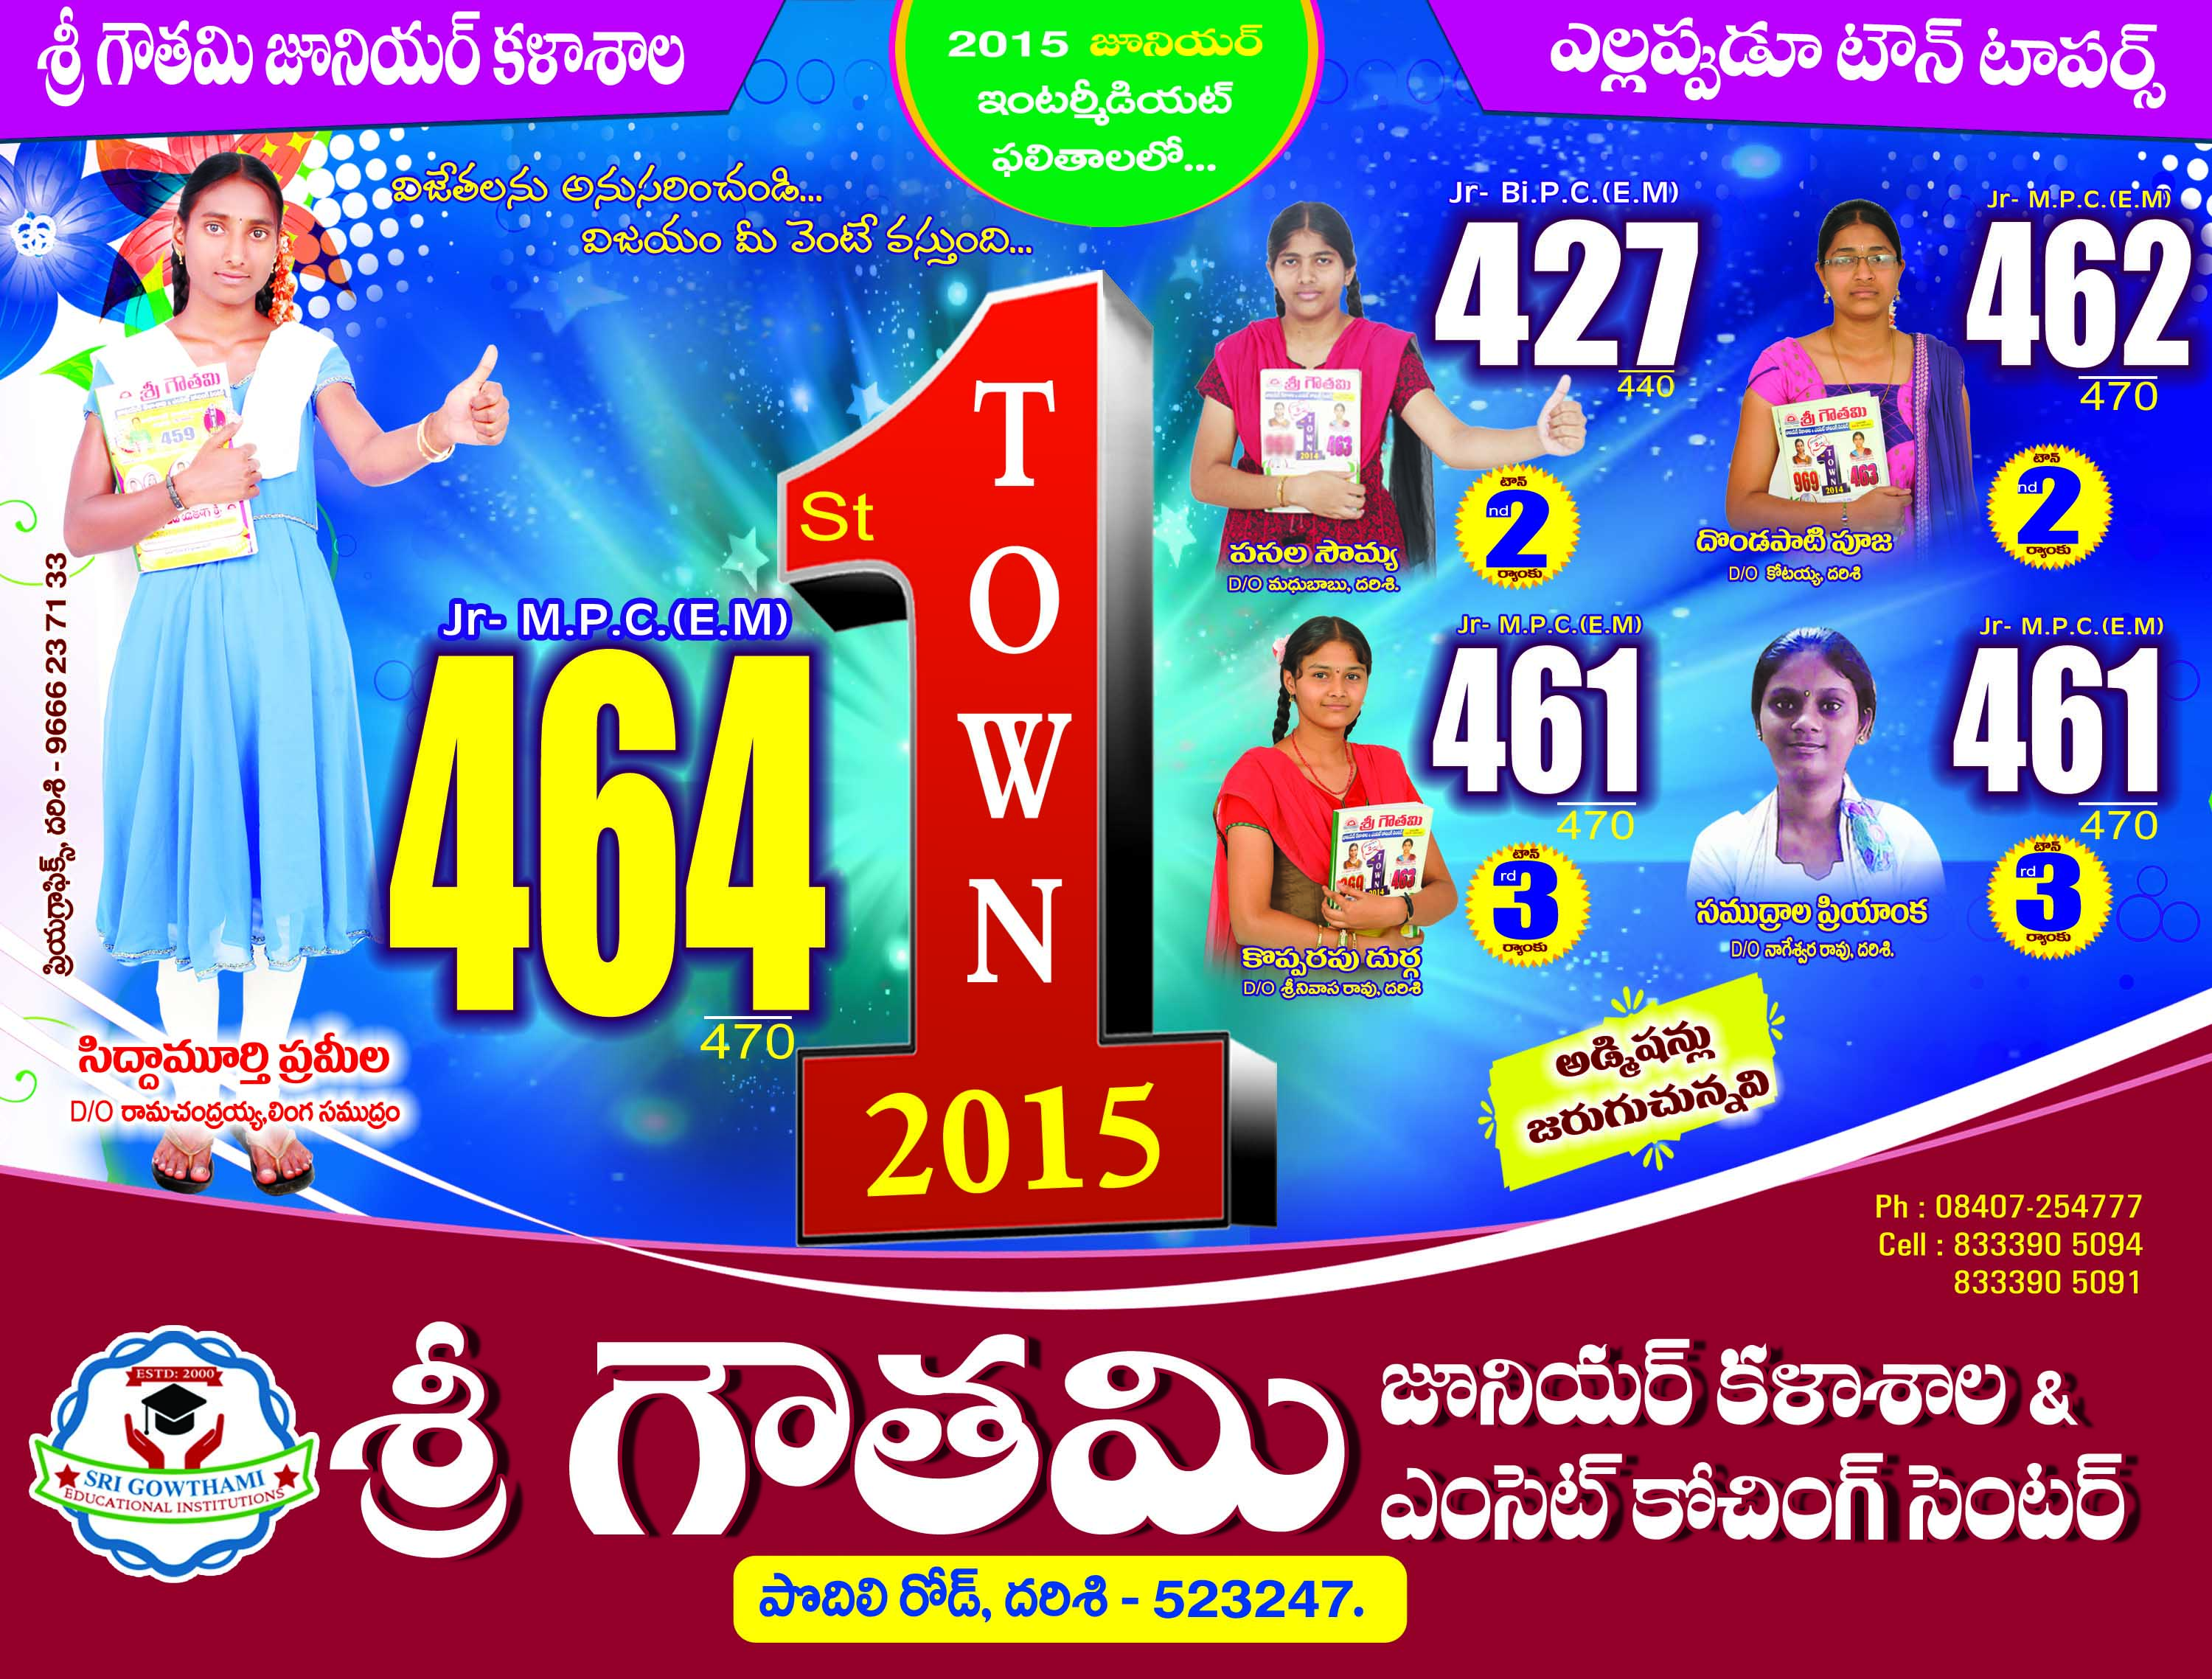 MARCH-2015 JR INTER TOPPERS-2015 - SRI GOWTHAMI JUNIOR COLLEGE  ,Darsi